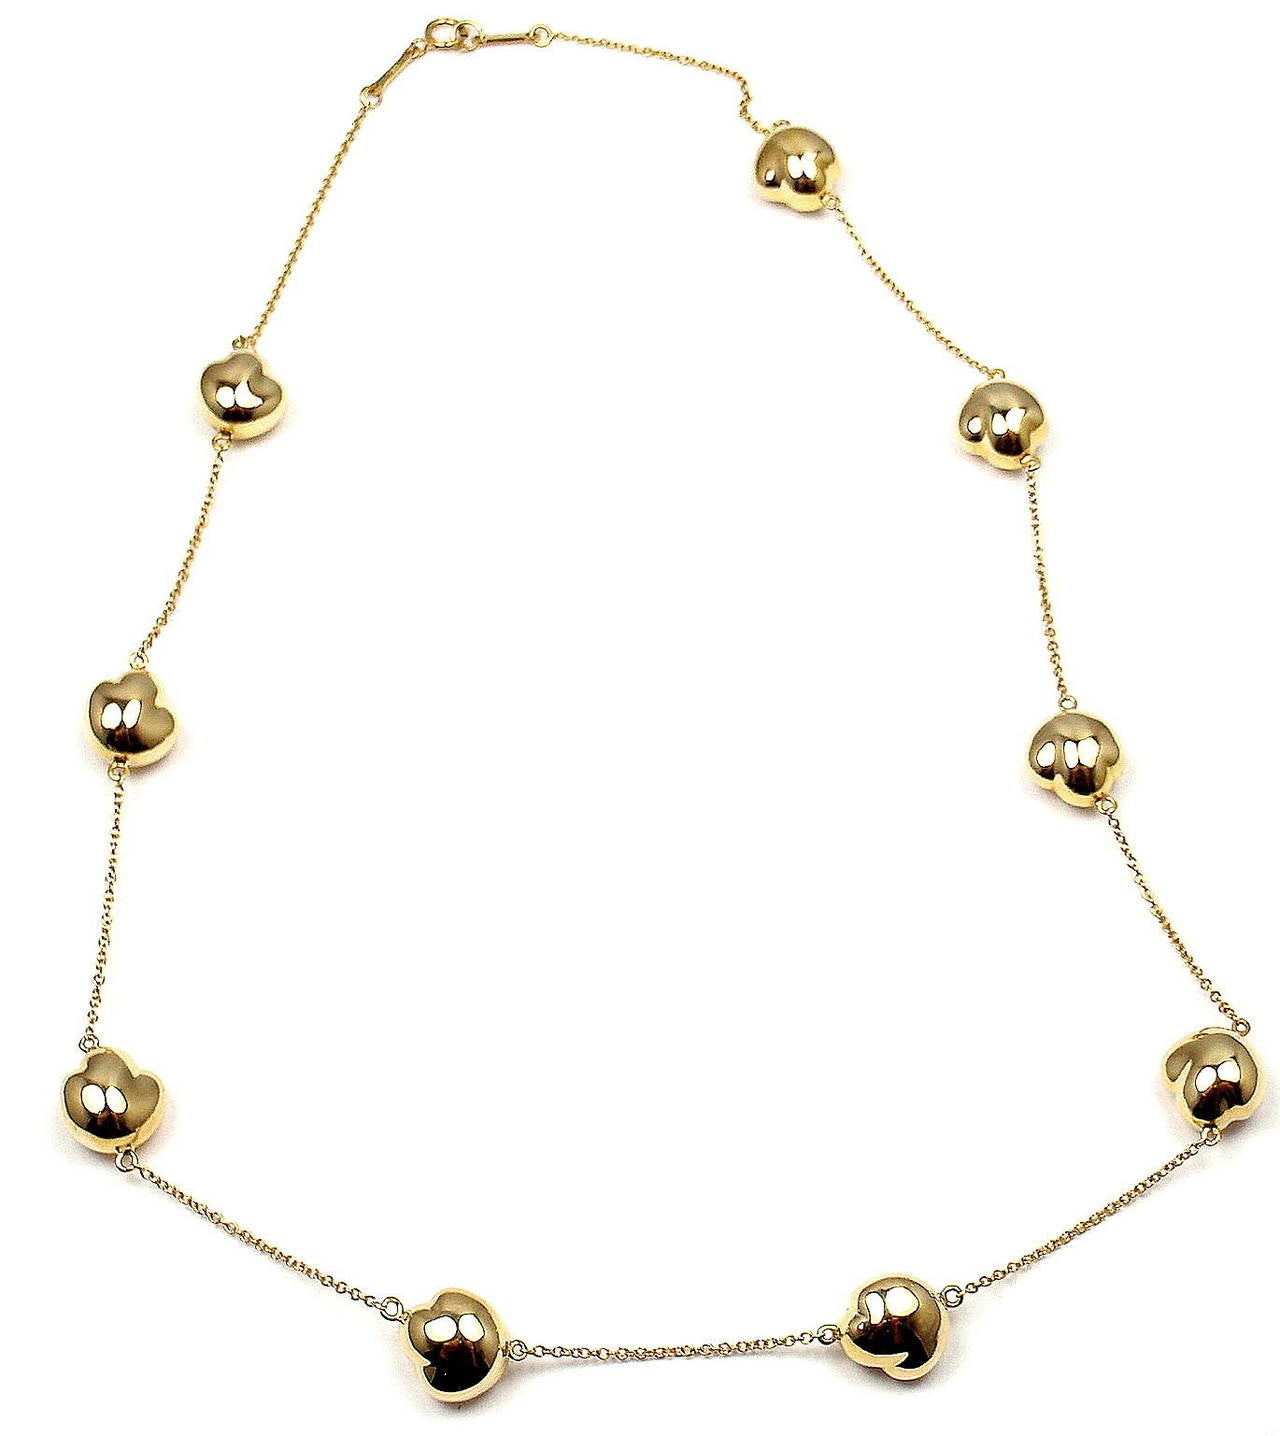 18k Yellow Gold Bean Necklace by Elsa Peretti for Tiffany & Co.

Details:
Length: 16